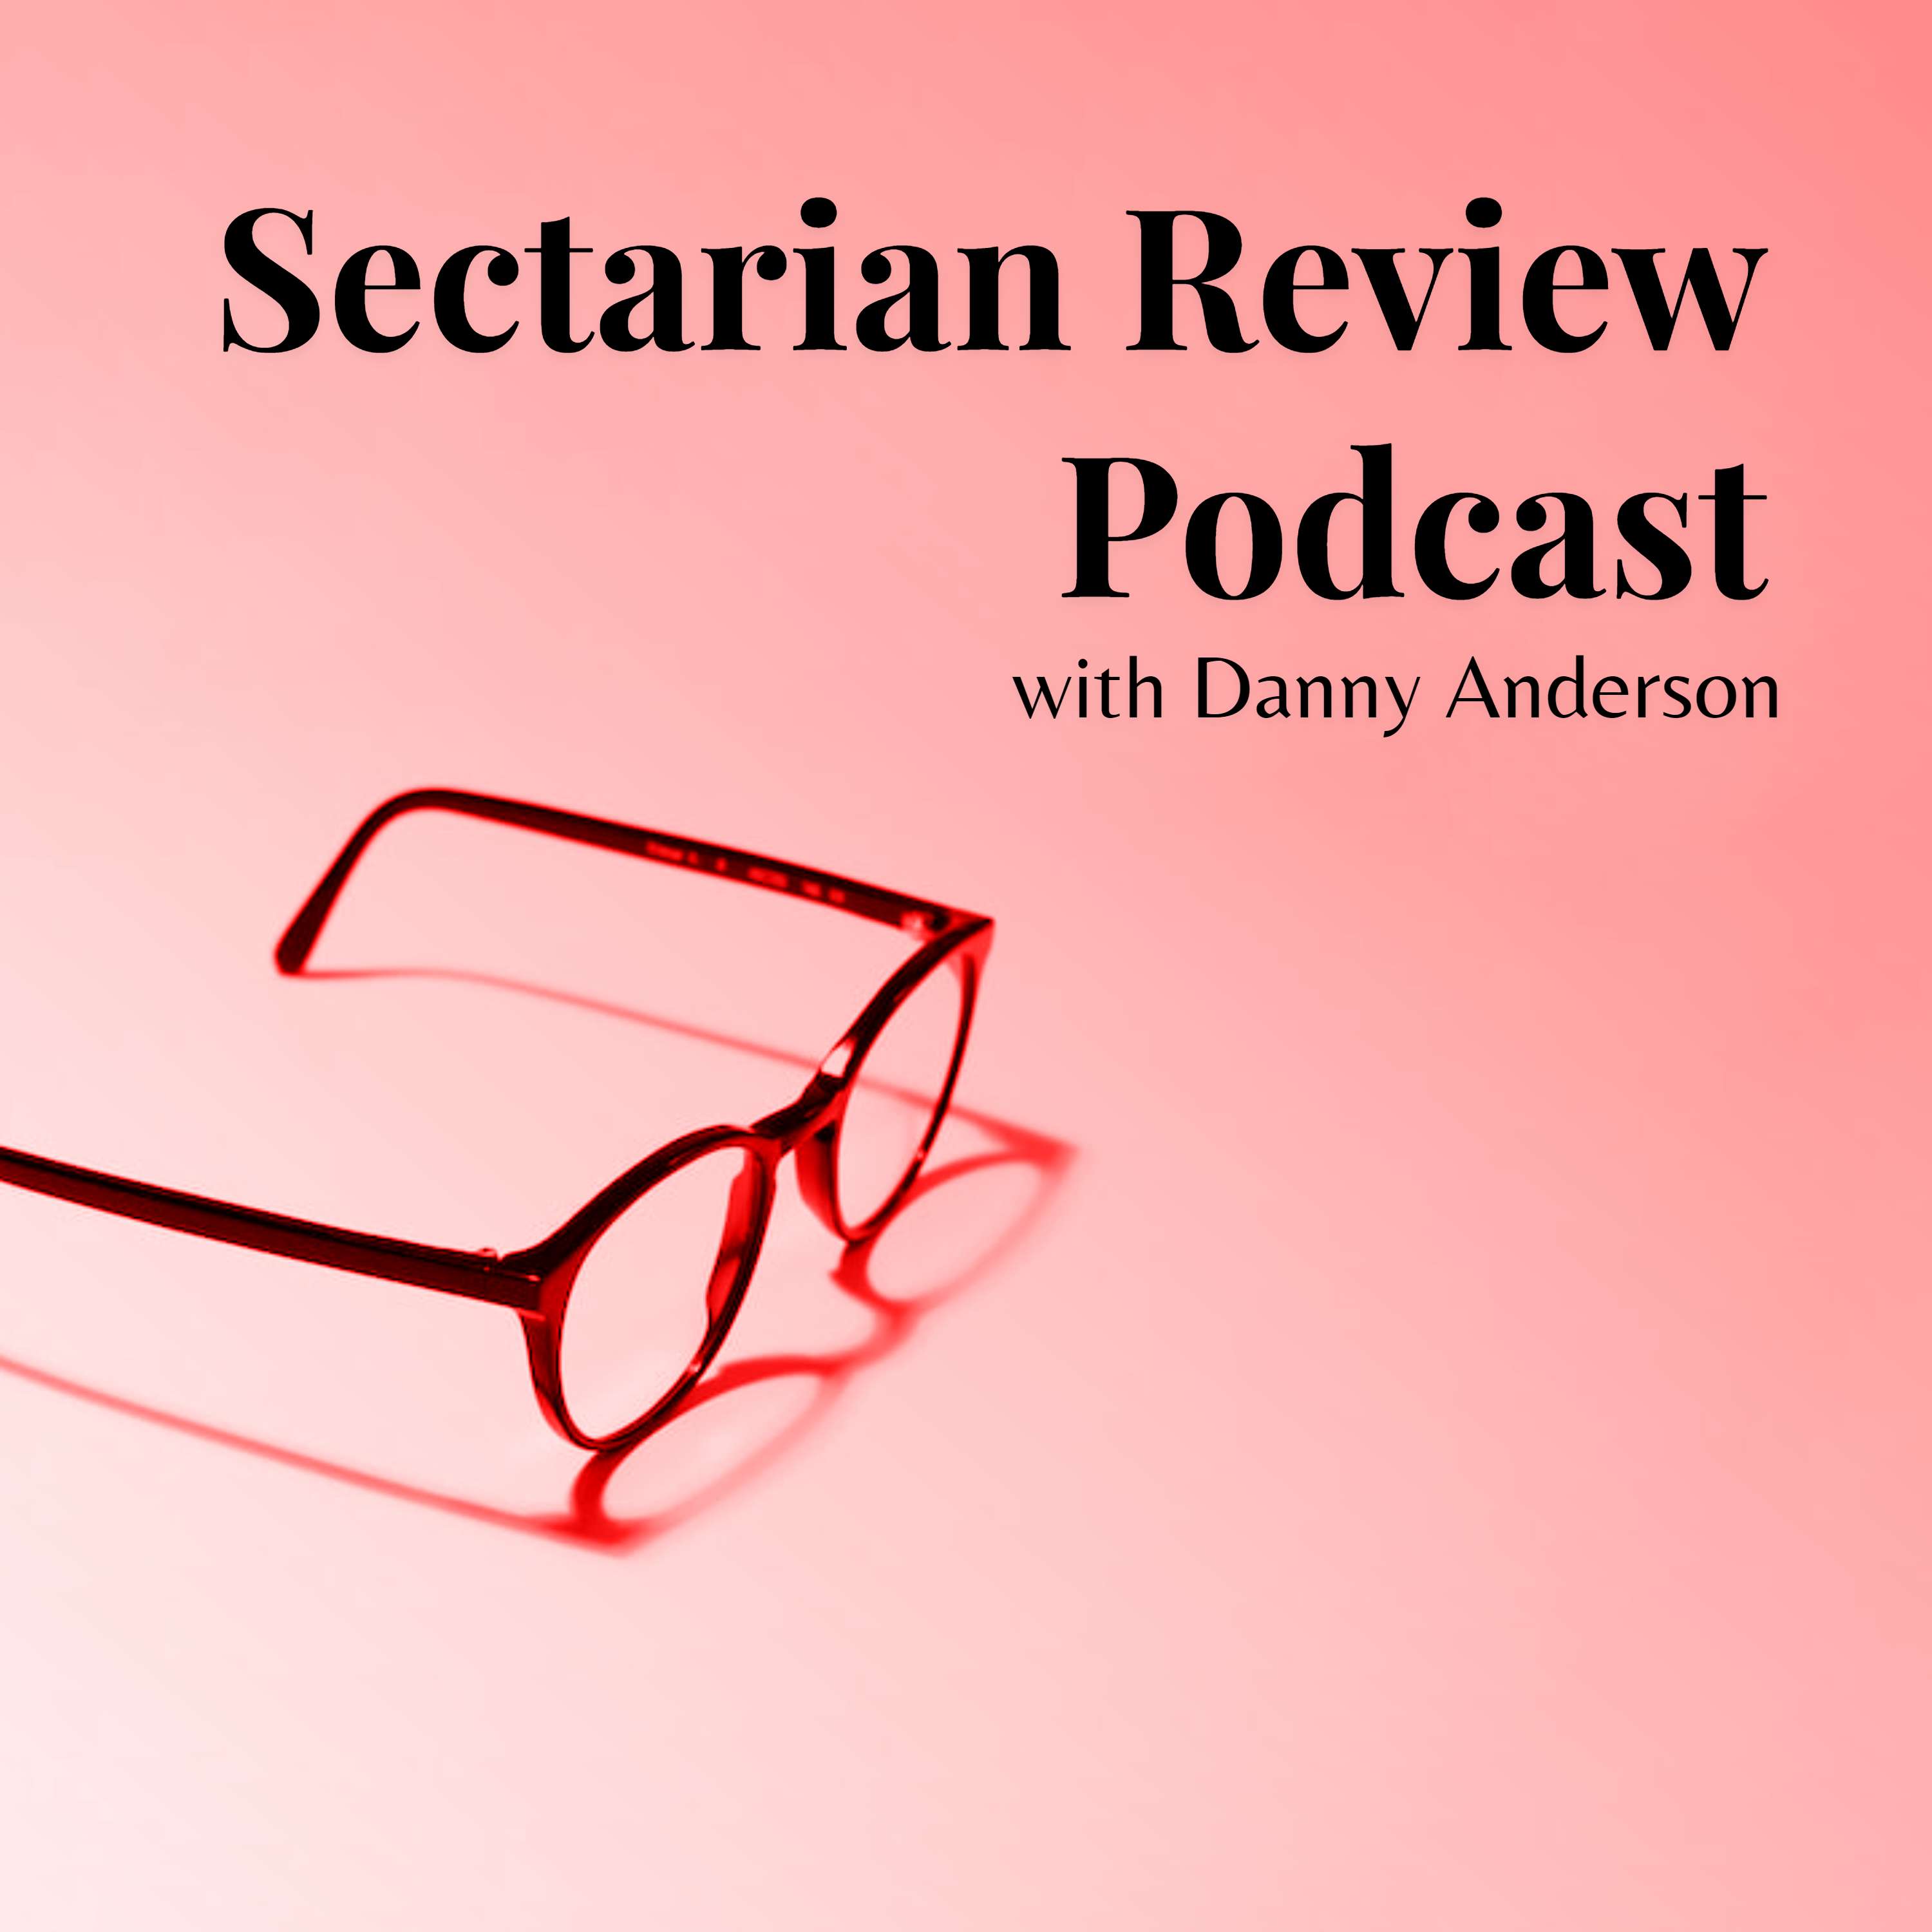 The Sectarian Review